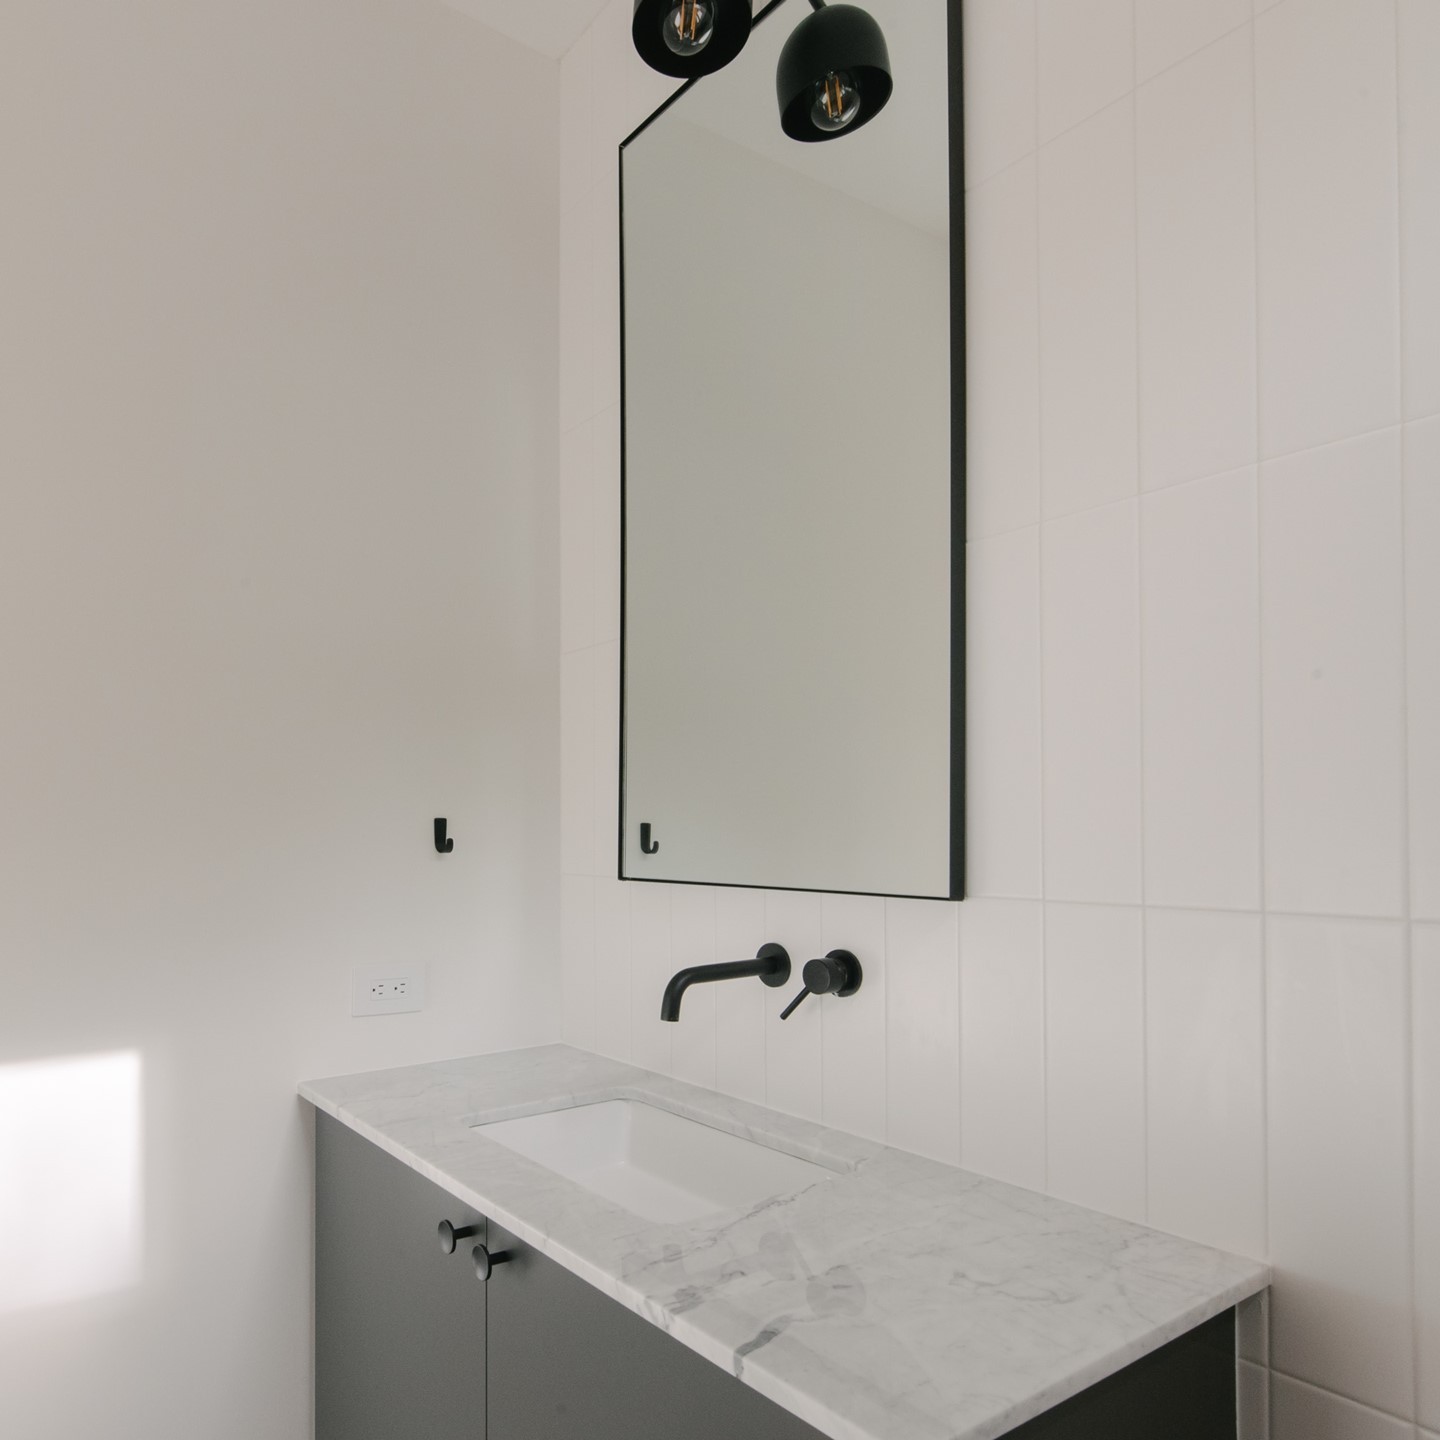 This chic minimalist bathroom is the perfect place to start and end the day.⁠
⁠
@caseychap